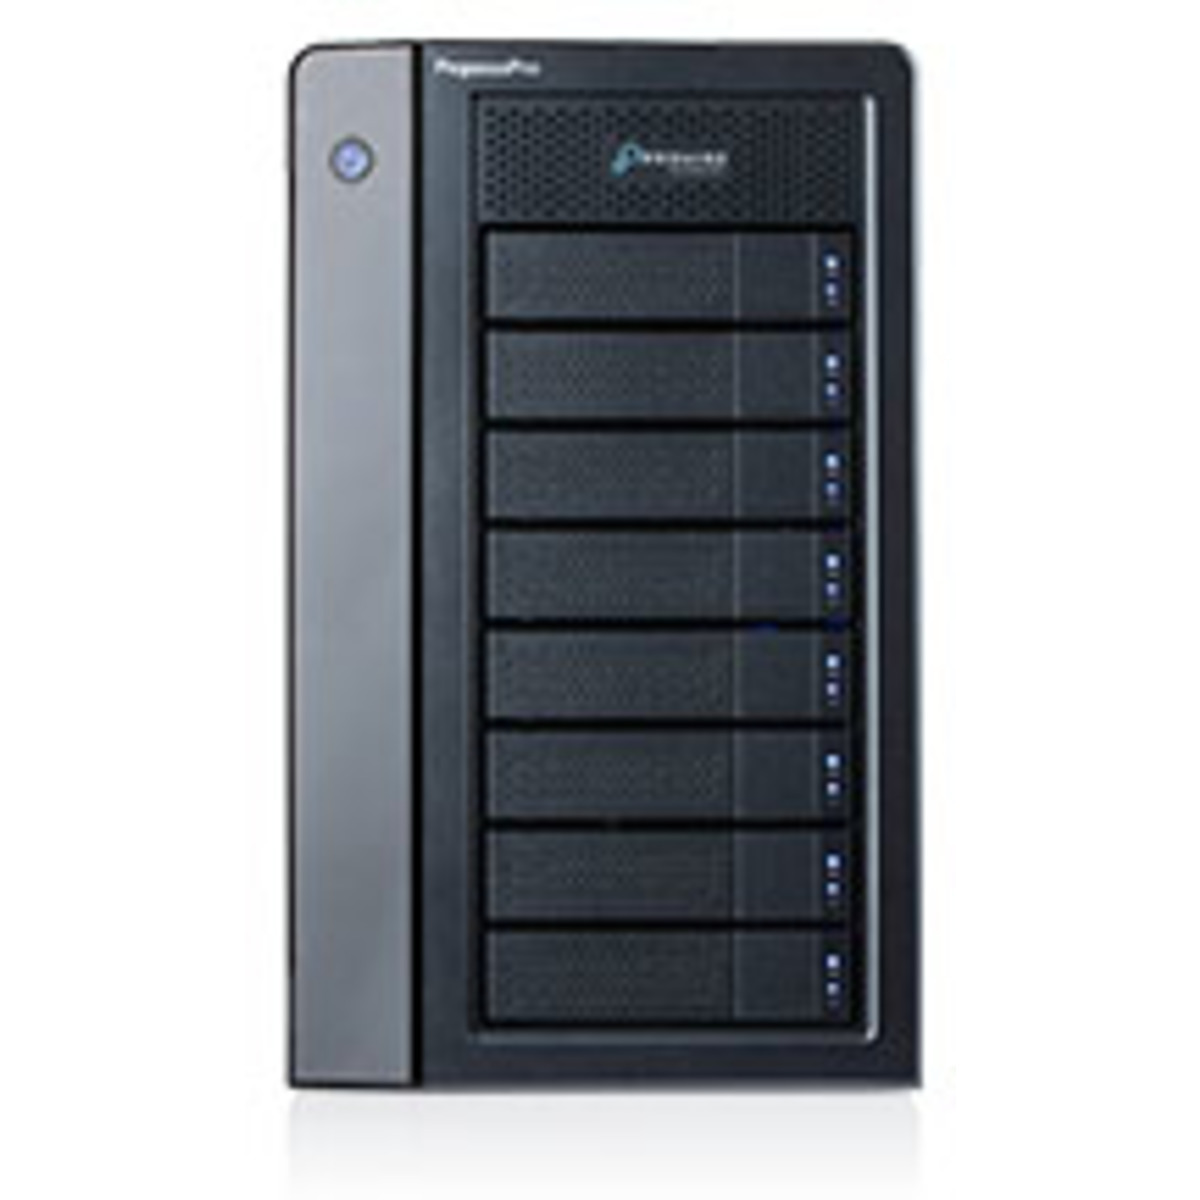 Promise Technology PegasusPro R8 48tb 8-Bay Desktop Multimedia / Power User / Business DAS-NAS - Combo Direct + Network Storage Device 6x8tb Seagate EXOS 7E10 ST8000NM017B 3.5 7200rpm SATA 6Gb/s HDD ENTERPRISE Class Drives Installed - Burn-In Tested PegasusPro R8